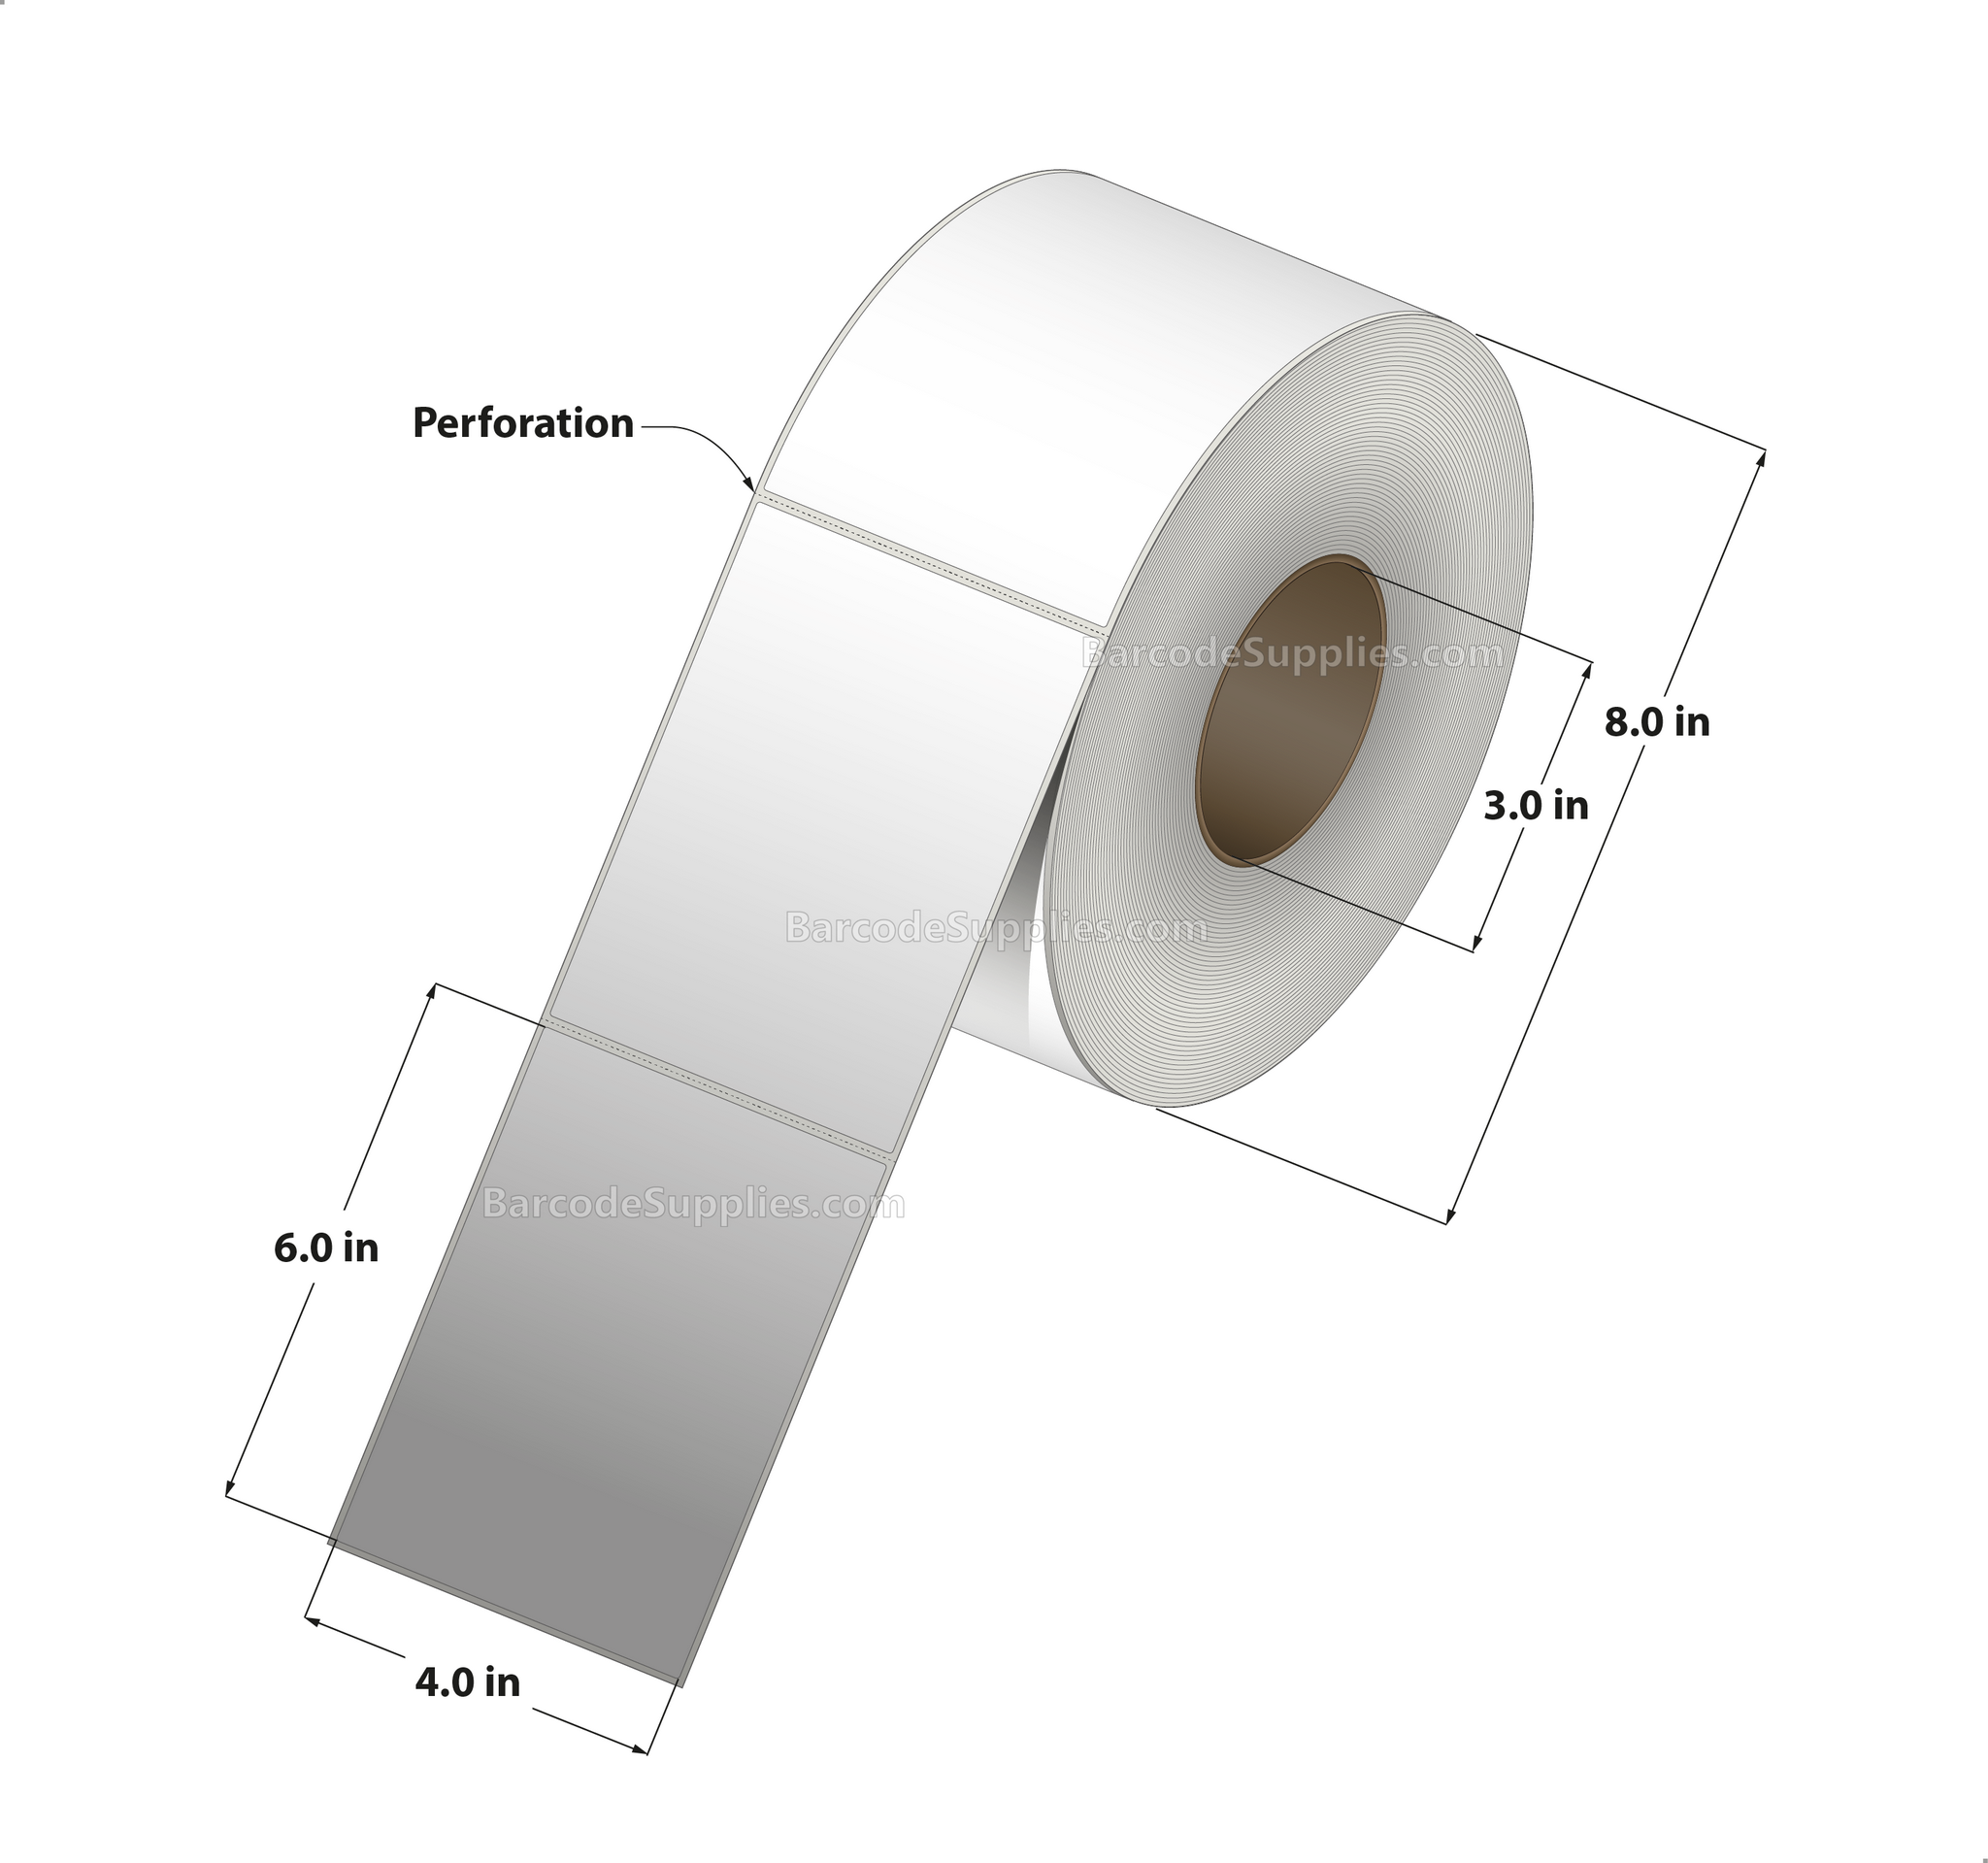 4 x 6 Thermal Transfer White Labels With Permanent Adhesive - Perforated - 1050 Labels Per Roll - Carton Of 4 Rolls - 4200 Labels Total - MPN: RP-4-6-1050-3